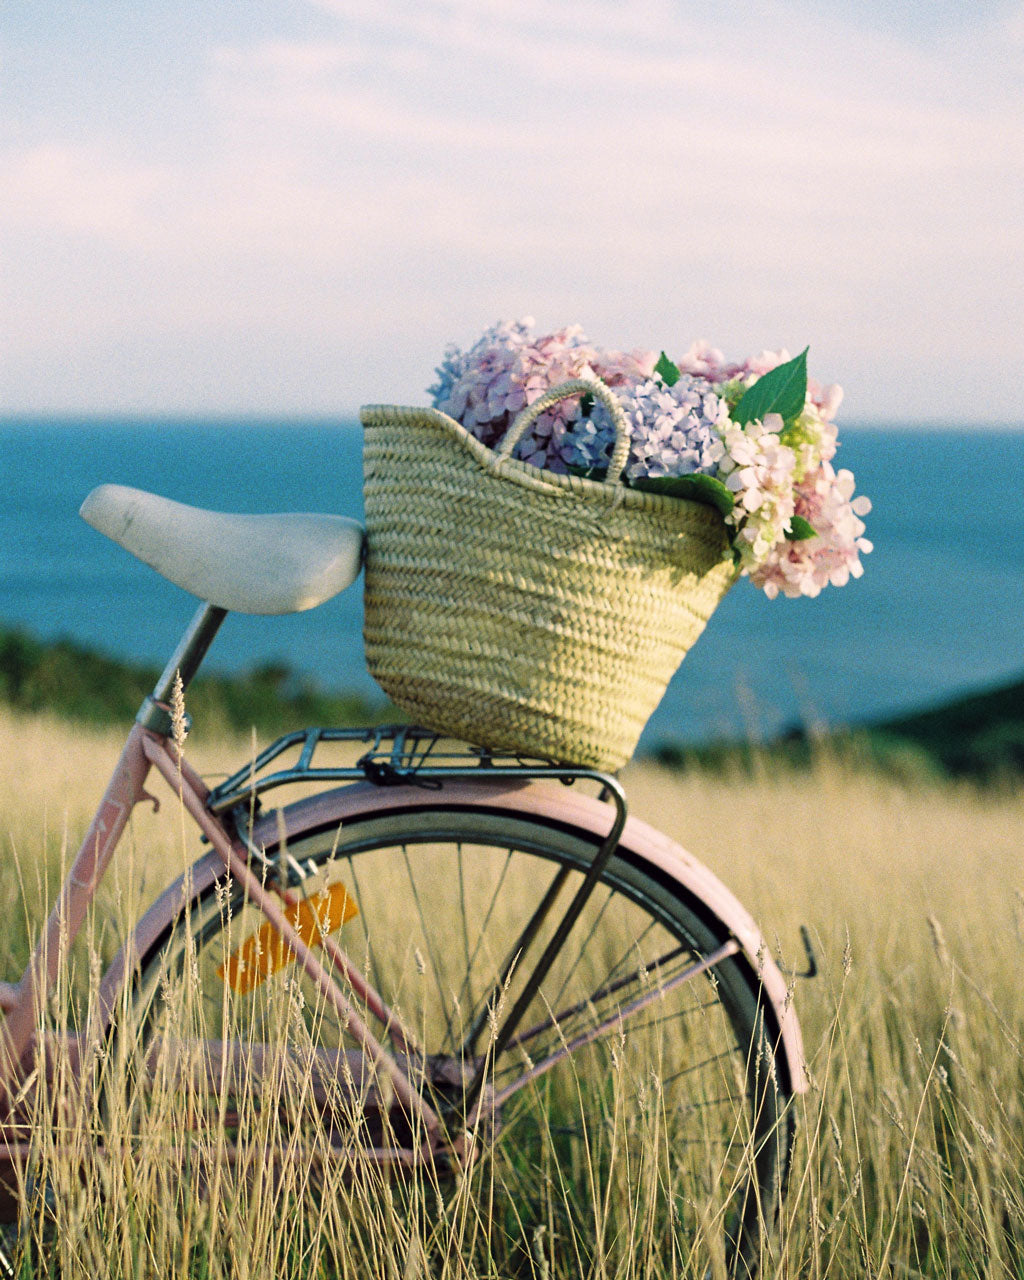 Bohemia Market Basket bag filled with flowers on a bike by the sea 